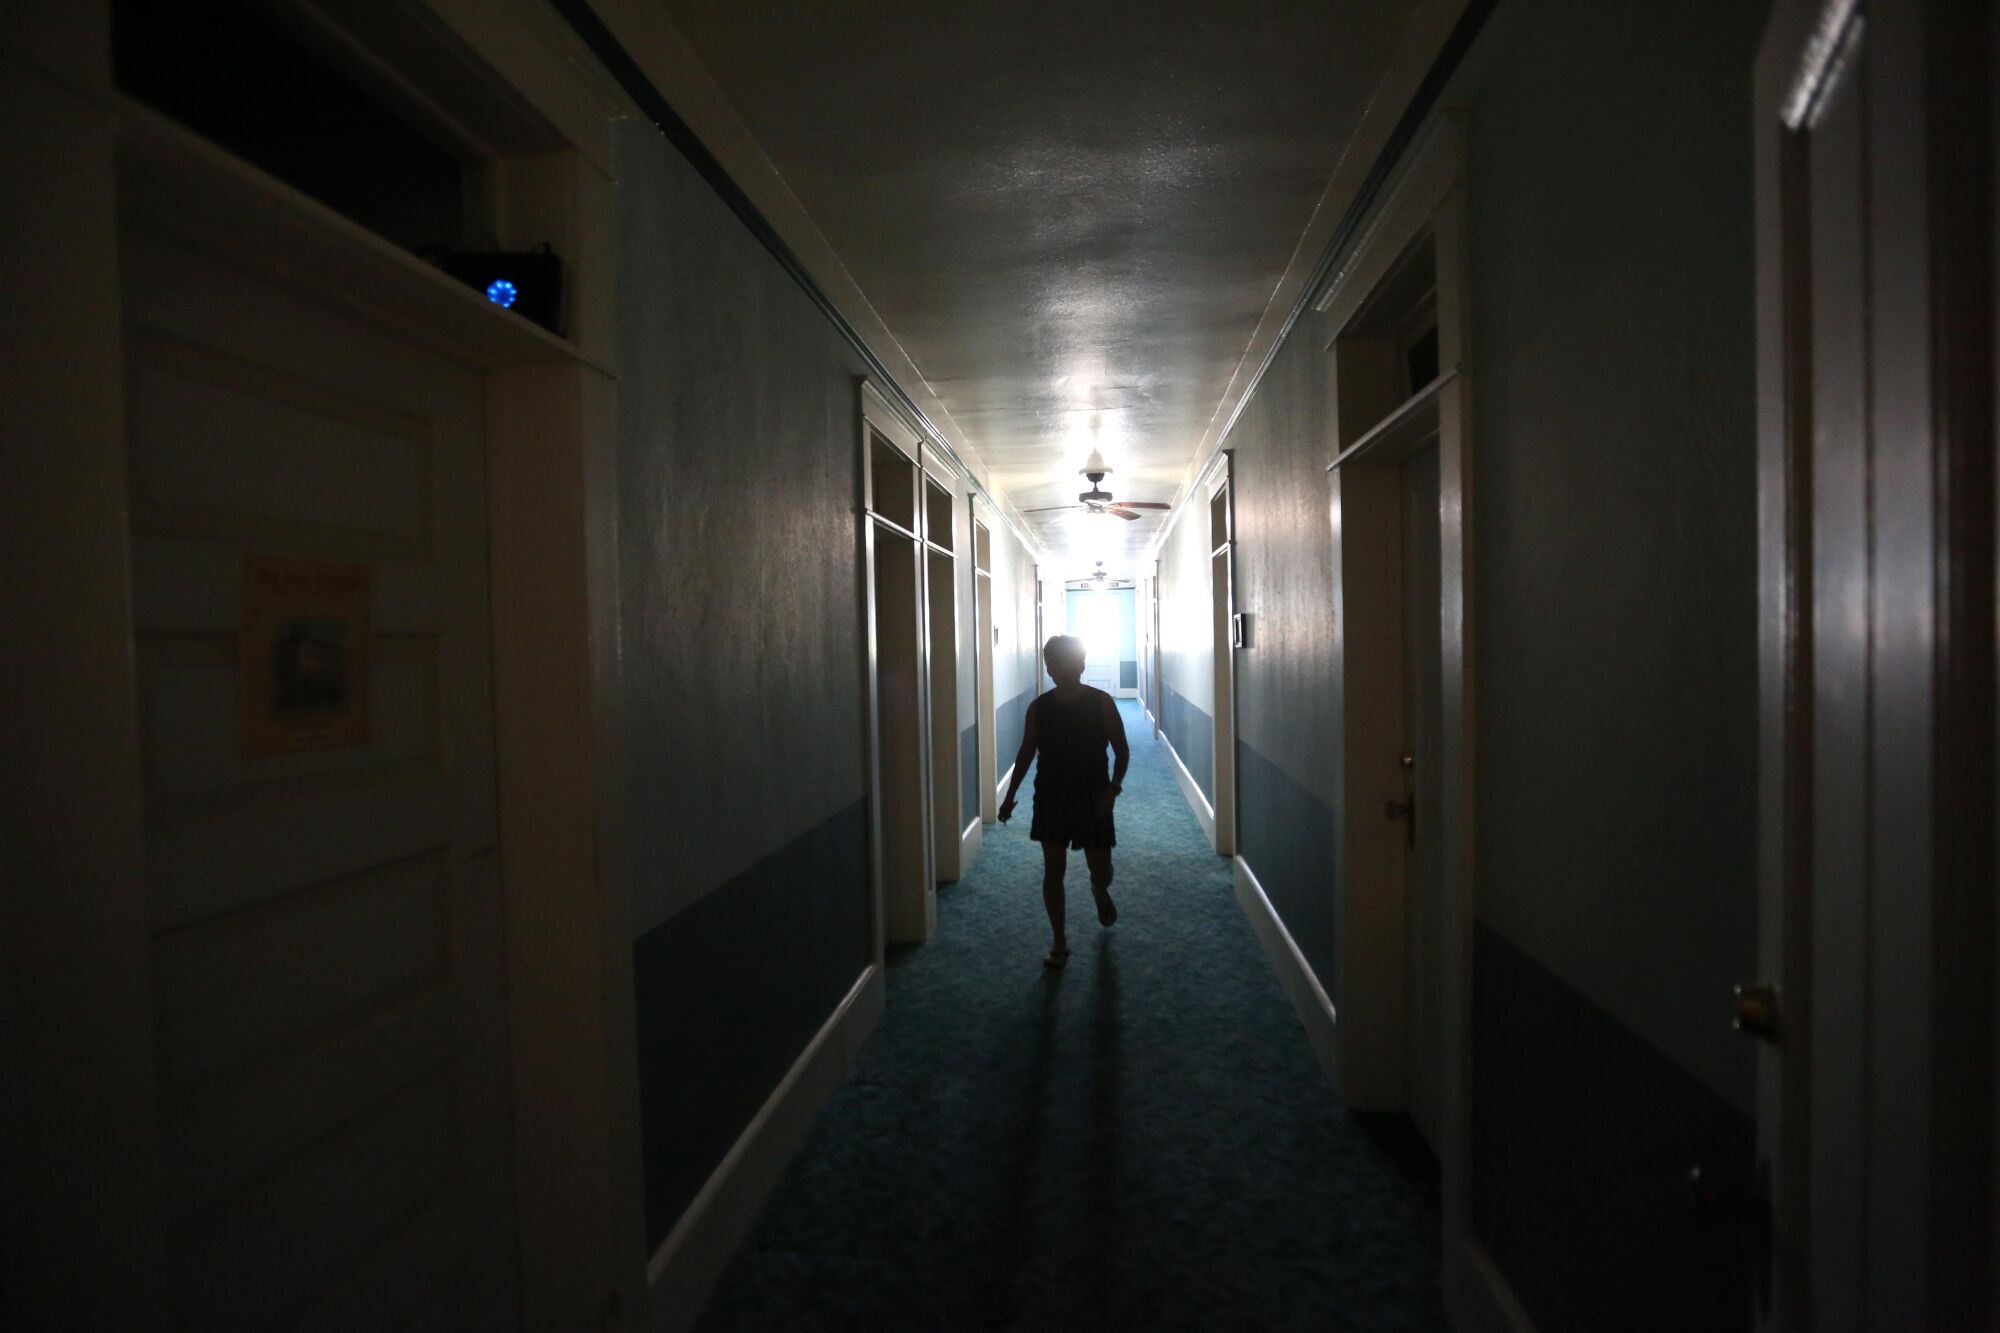 Hotel guest Terri LeDoux walks down a darkened hallway in the historic, and possibly haunted, Niles Hotel.